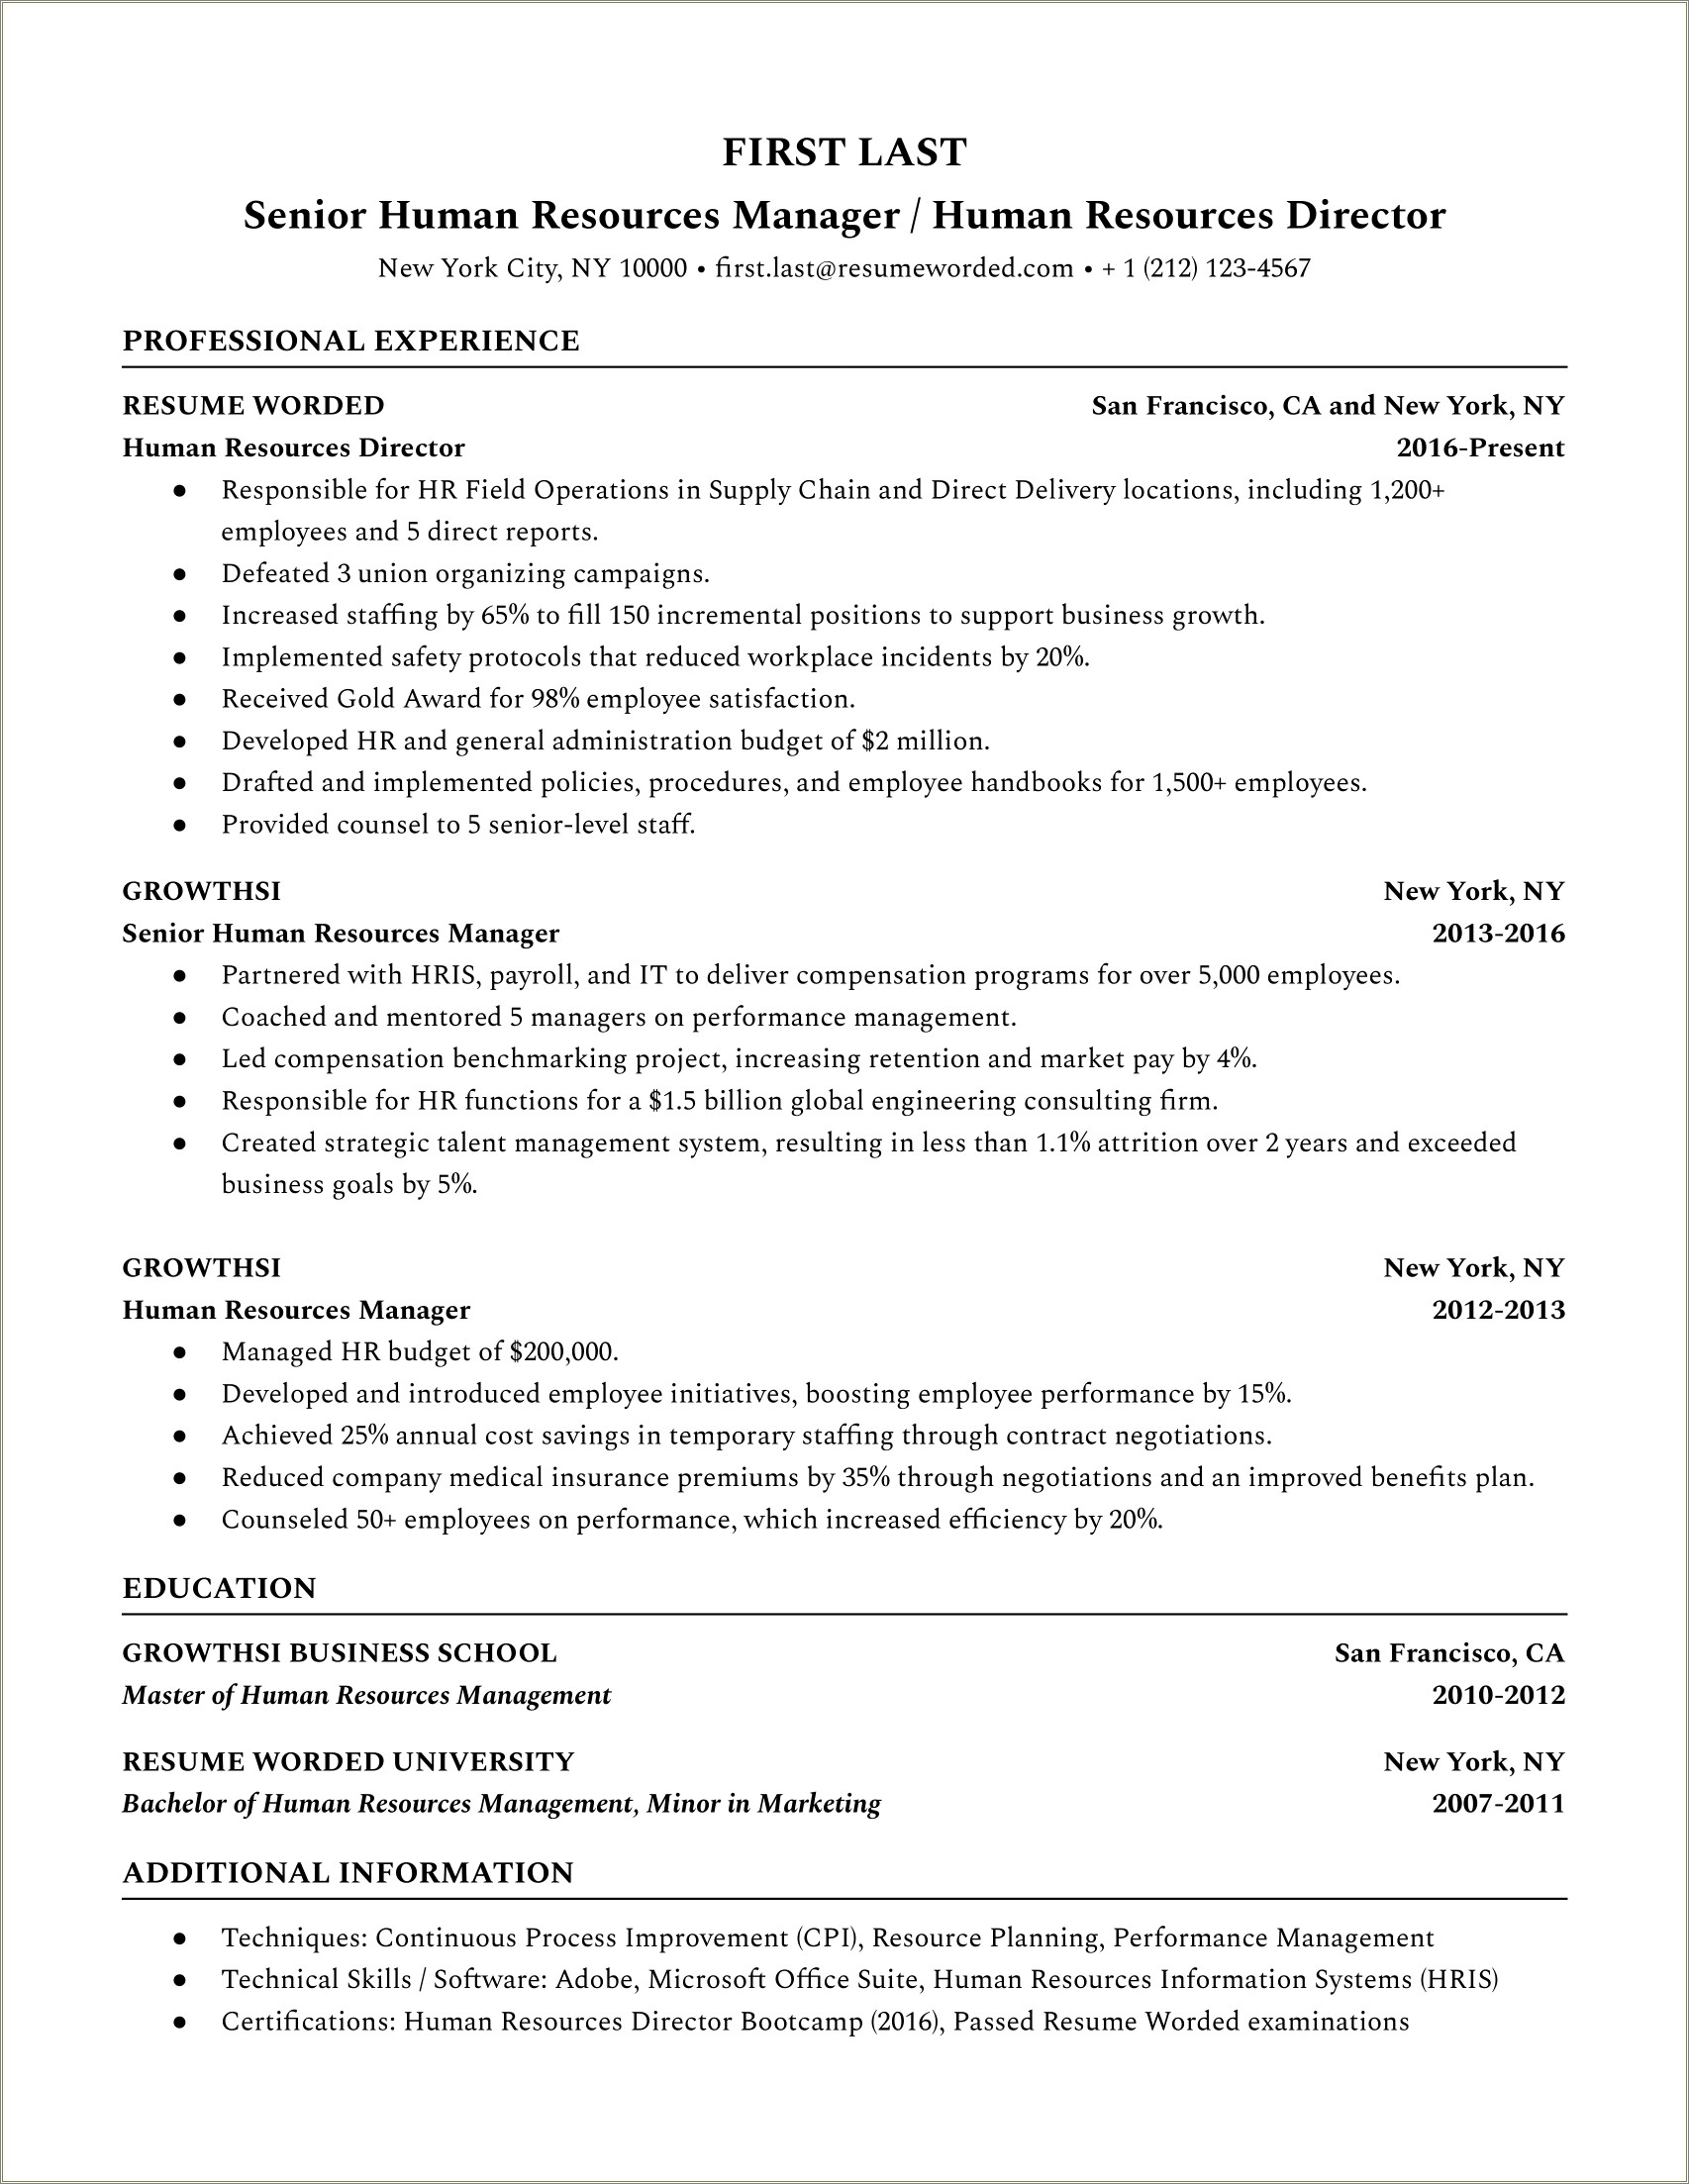 Resumes With No Experience Human Resources